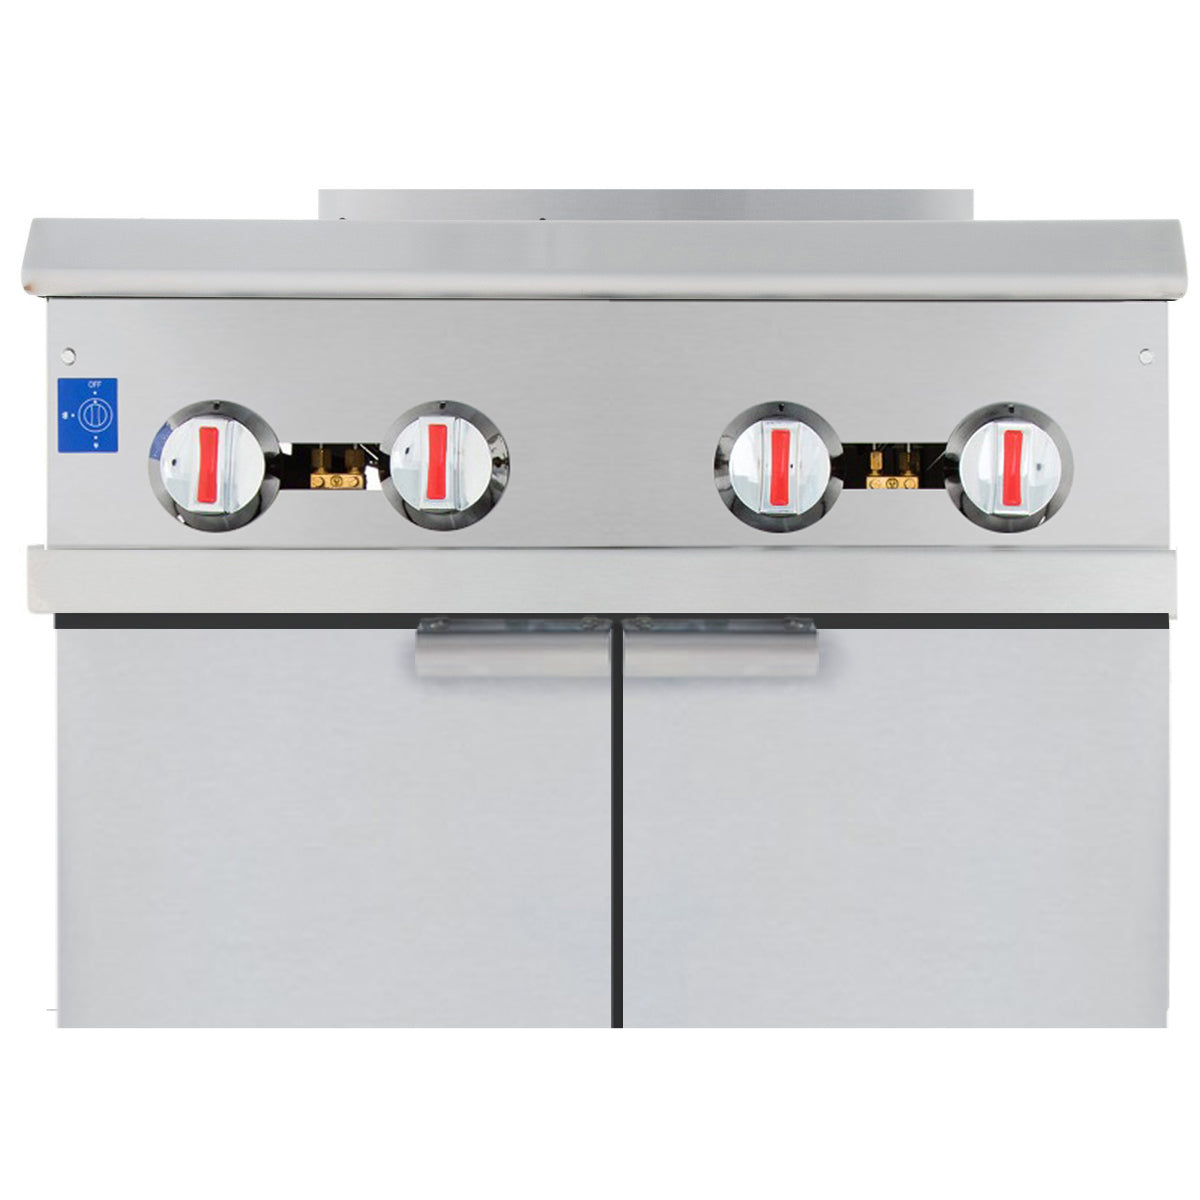 Empura EGR-24FC 24" Wide Commercial Gas Range 4 Top Burners With Storage Space and 2 Swing Doors